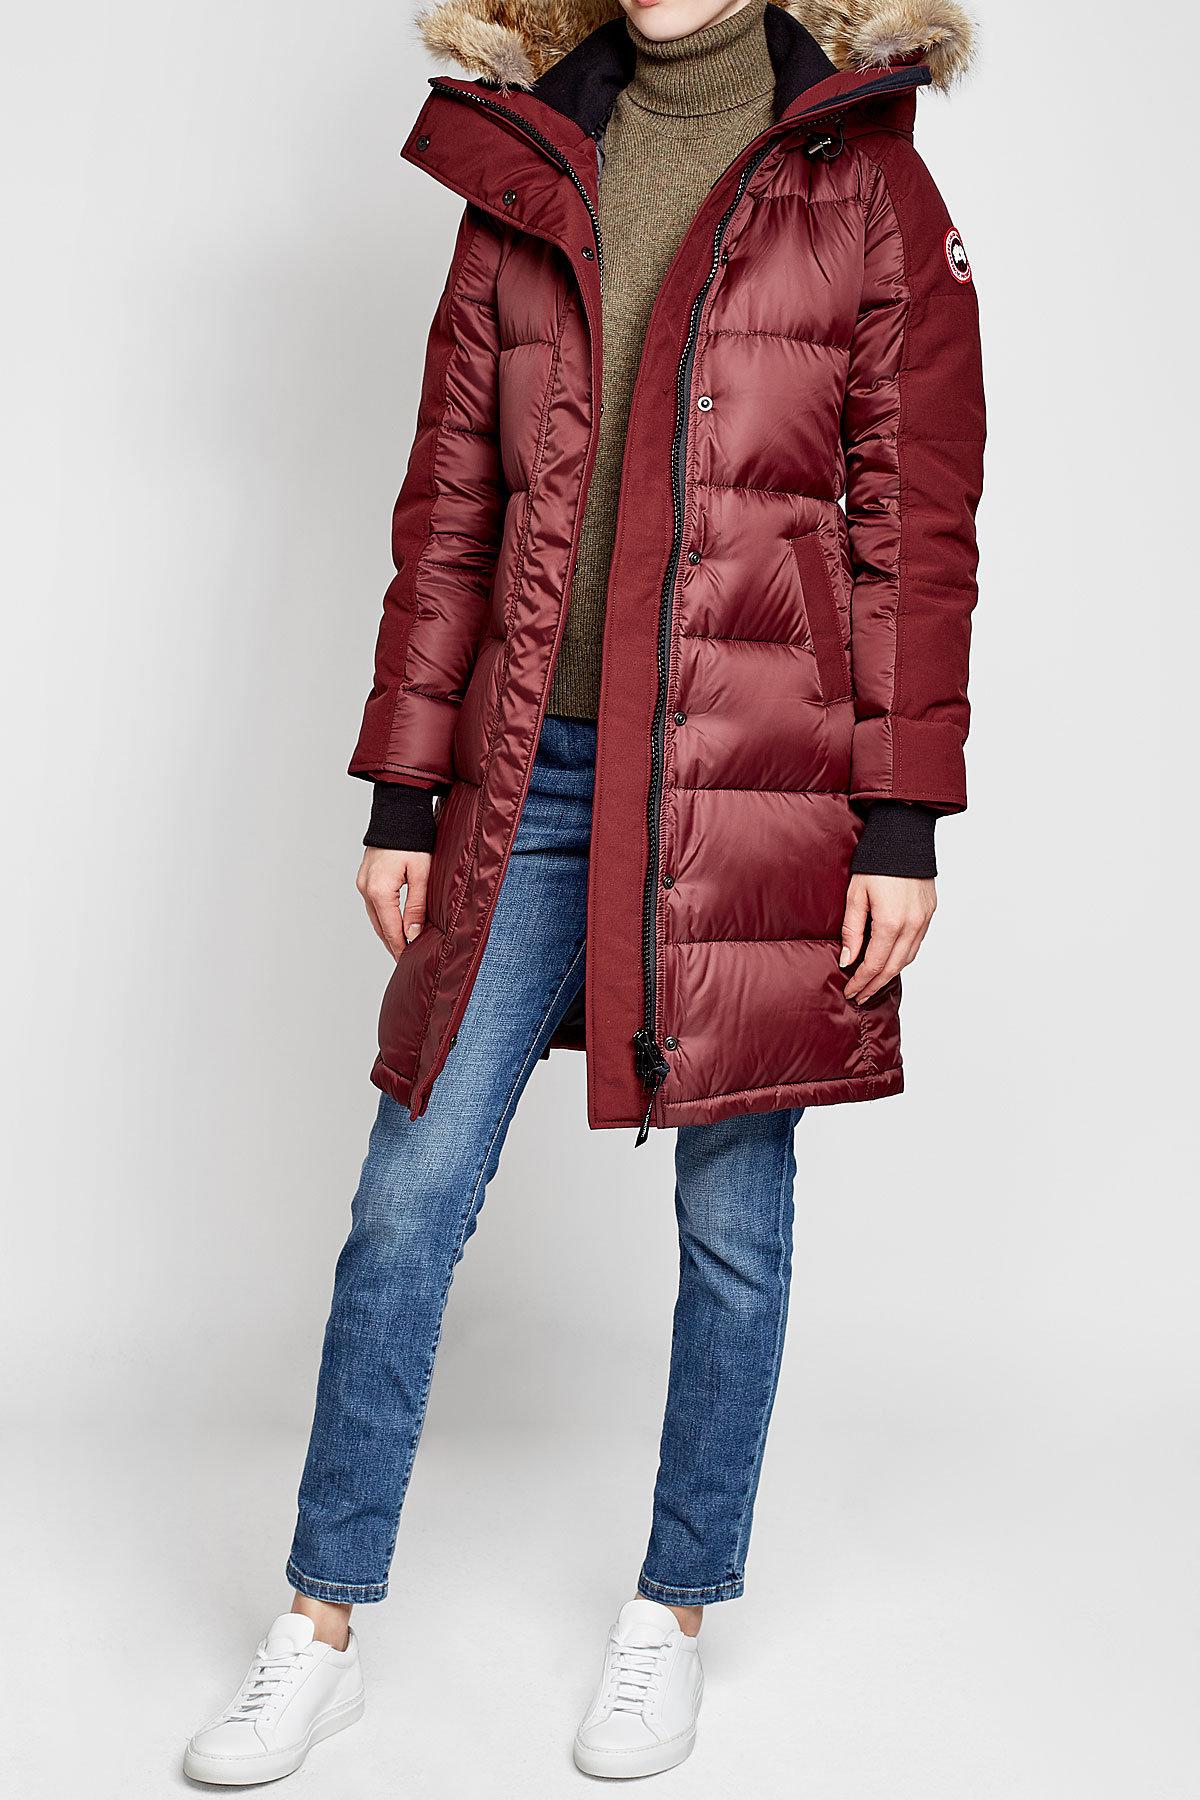 Lyst - Canada goose Down Parka With Fur-trimmed Hood in Red